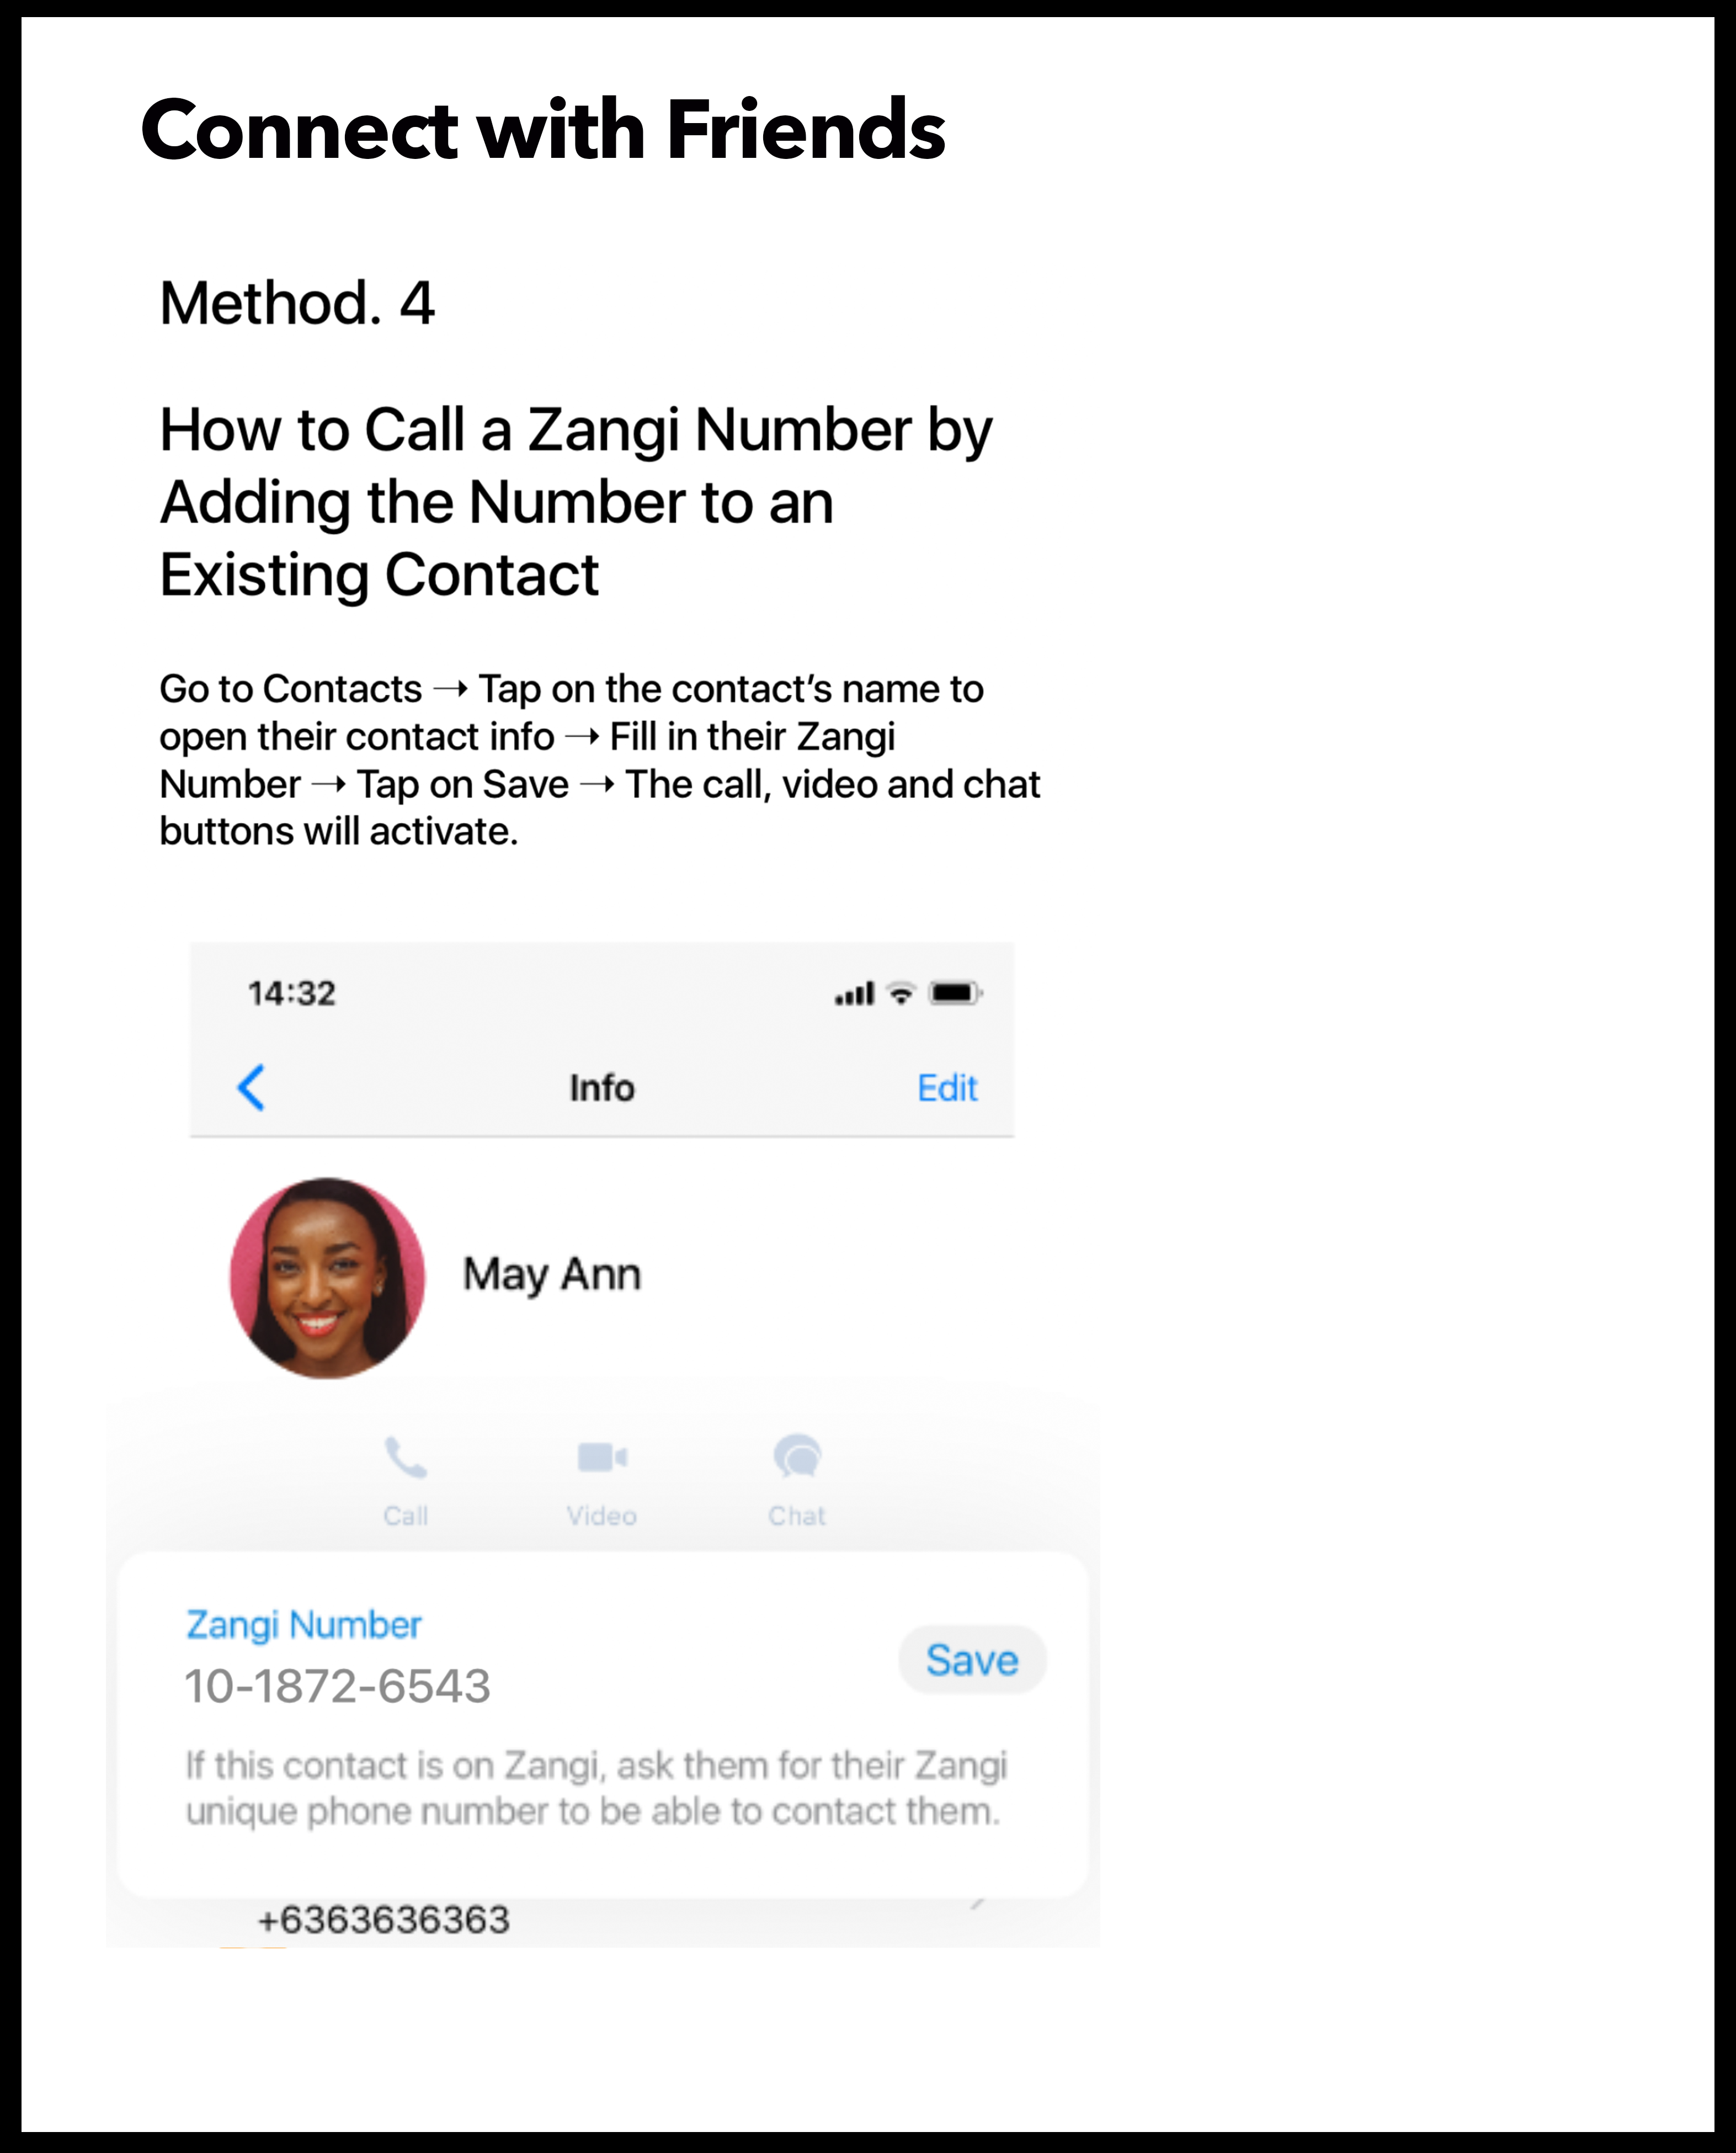 how to call a zangi number by adding their number to an existing contact